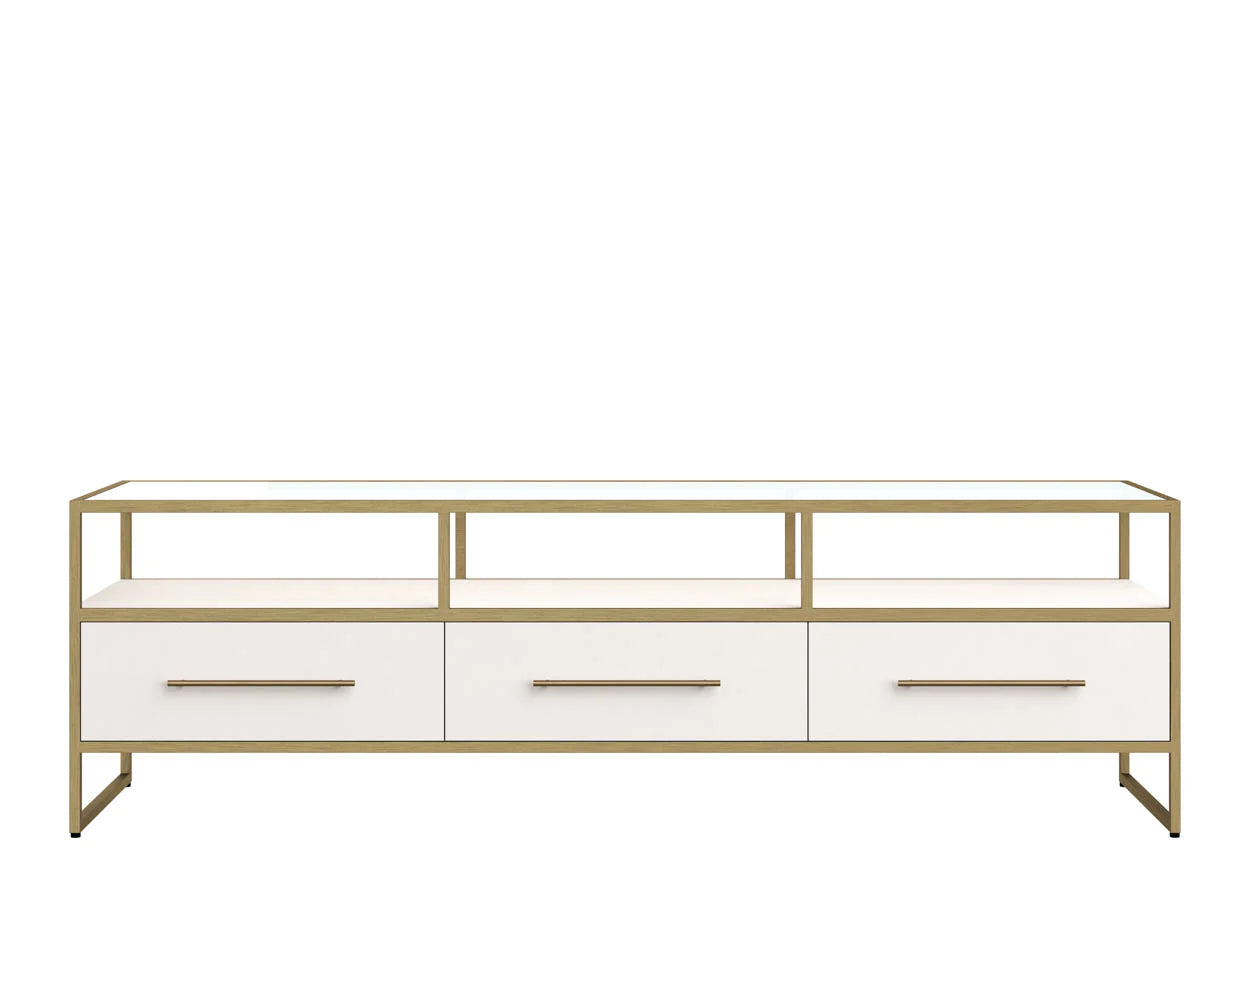 VENICE MEDIA CONSOLE AND CABINET - OYSTER SHAGREEN